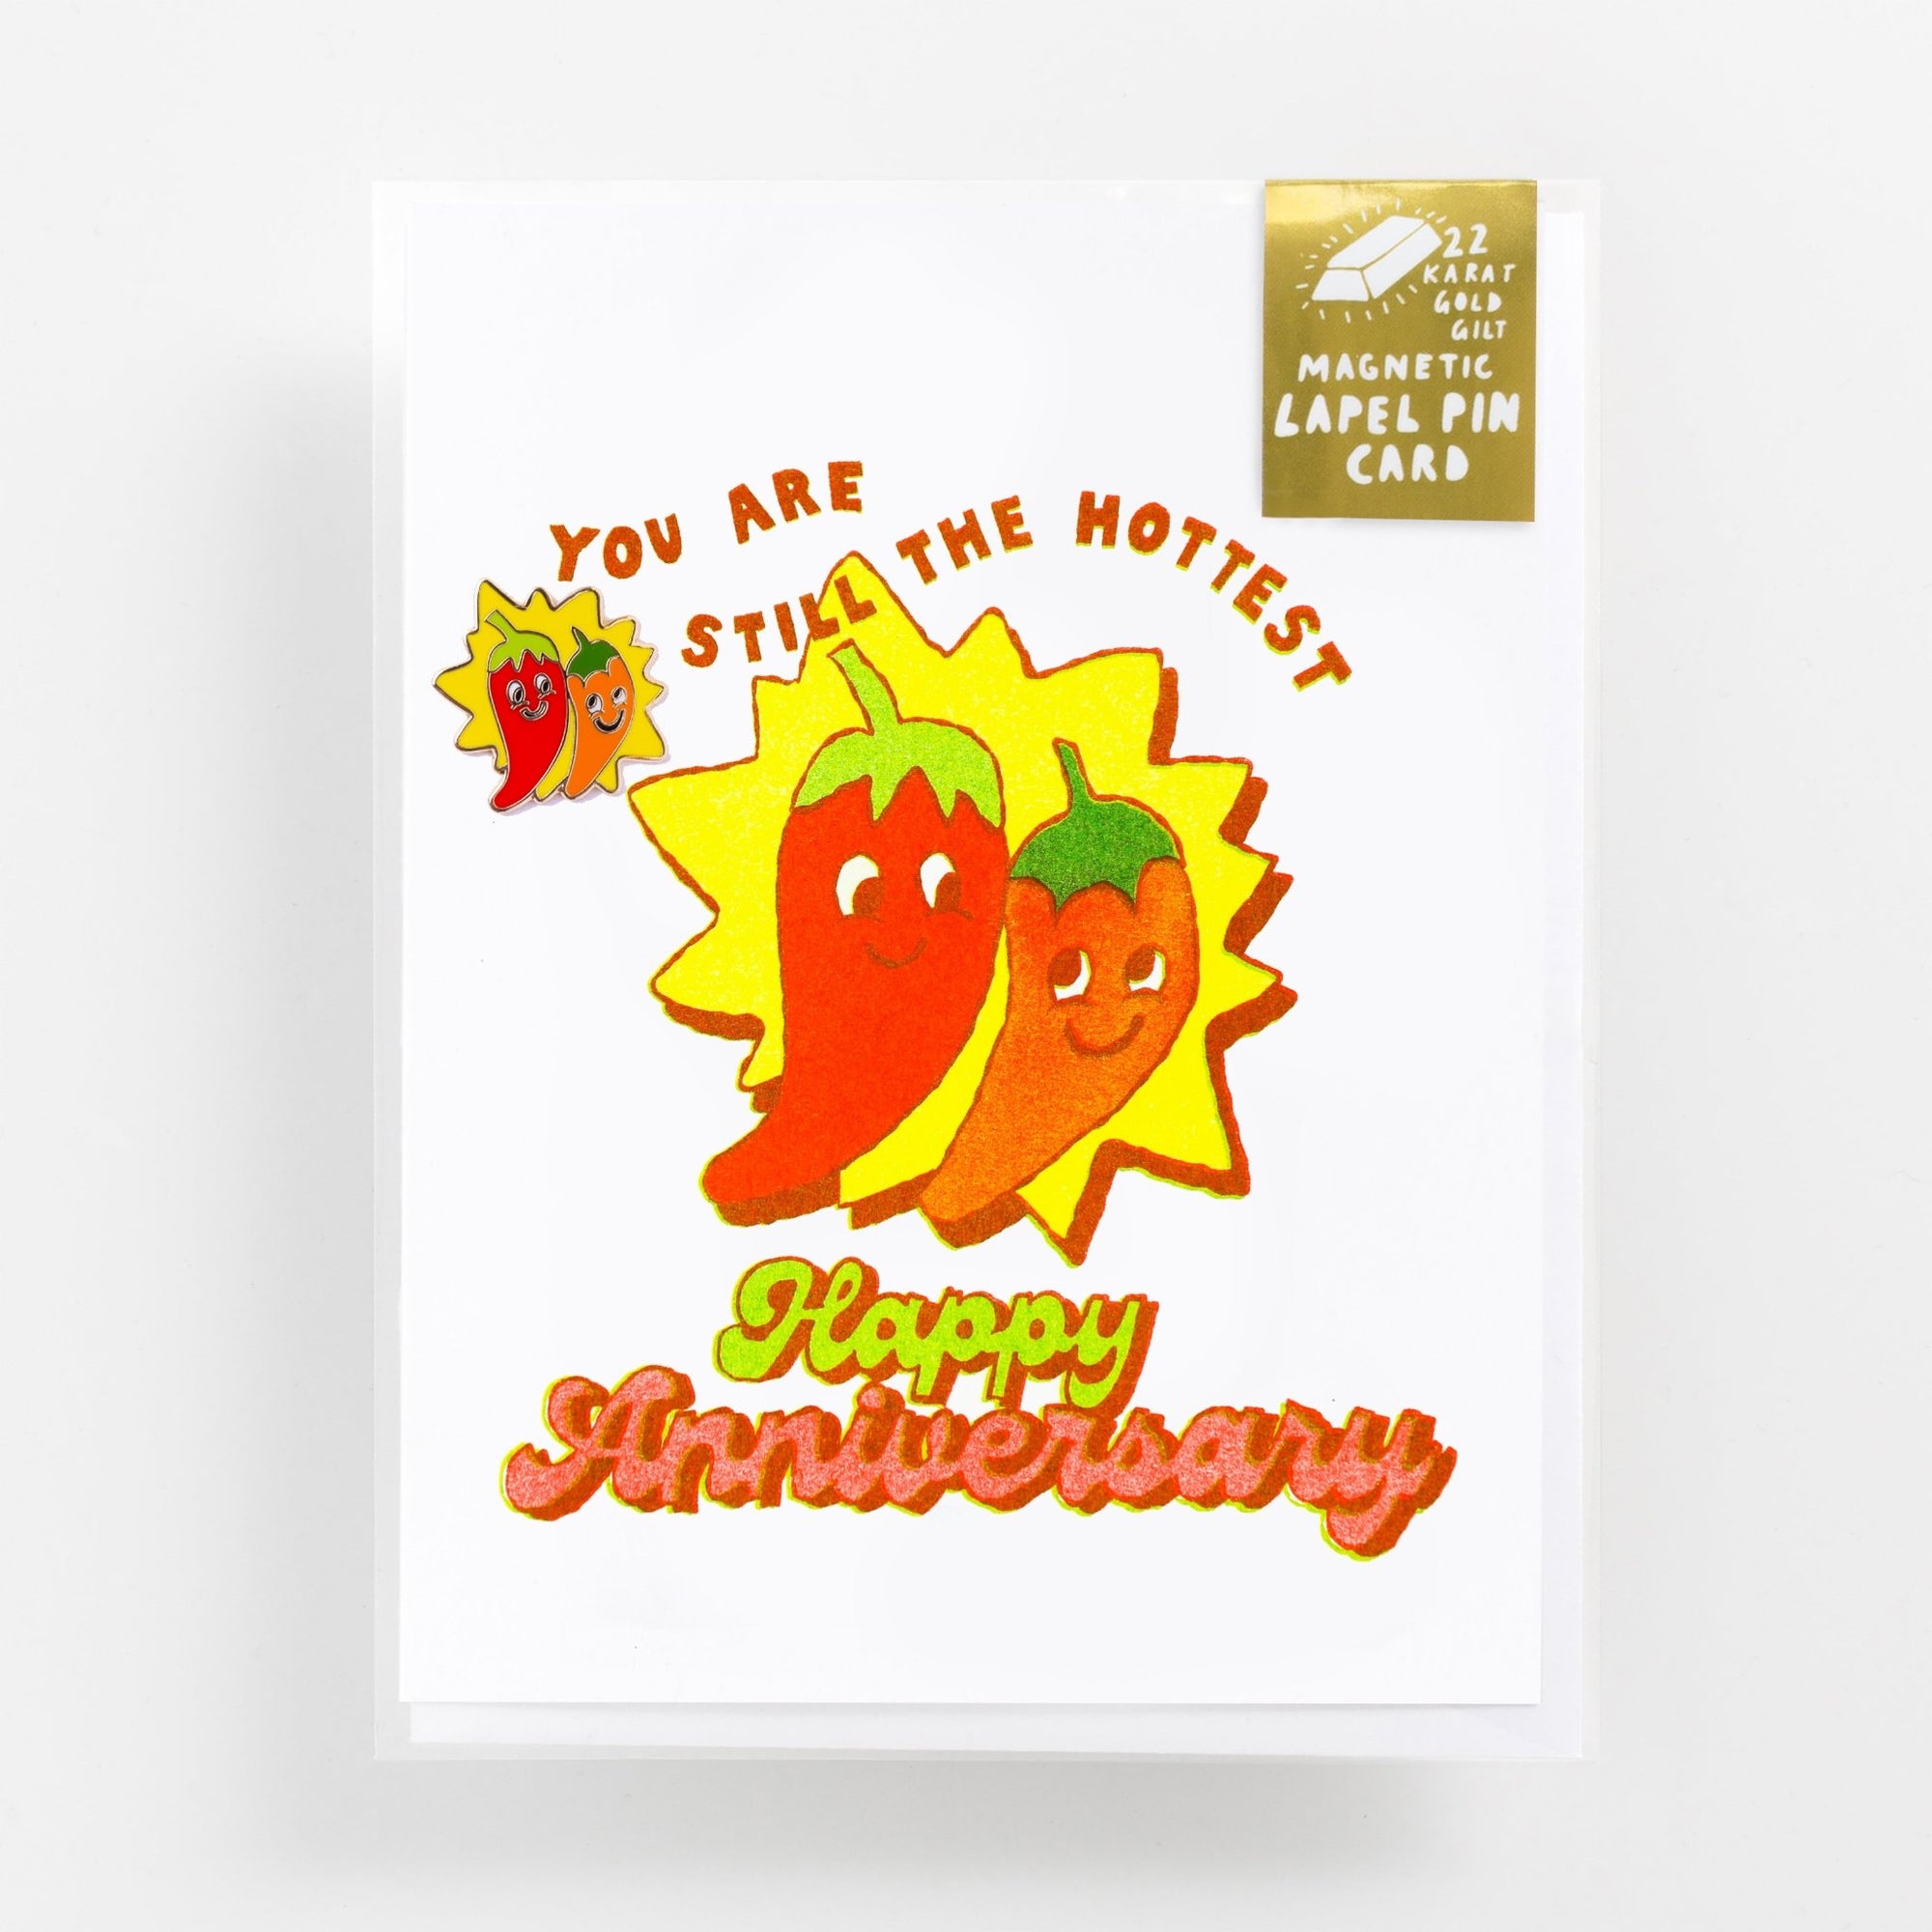 Still the Hottest Happy Anniversary - Lapel Pin Card - Yellow Owl Workshop